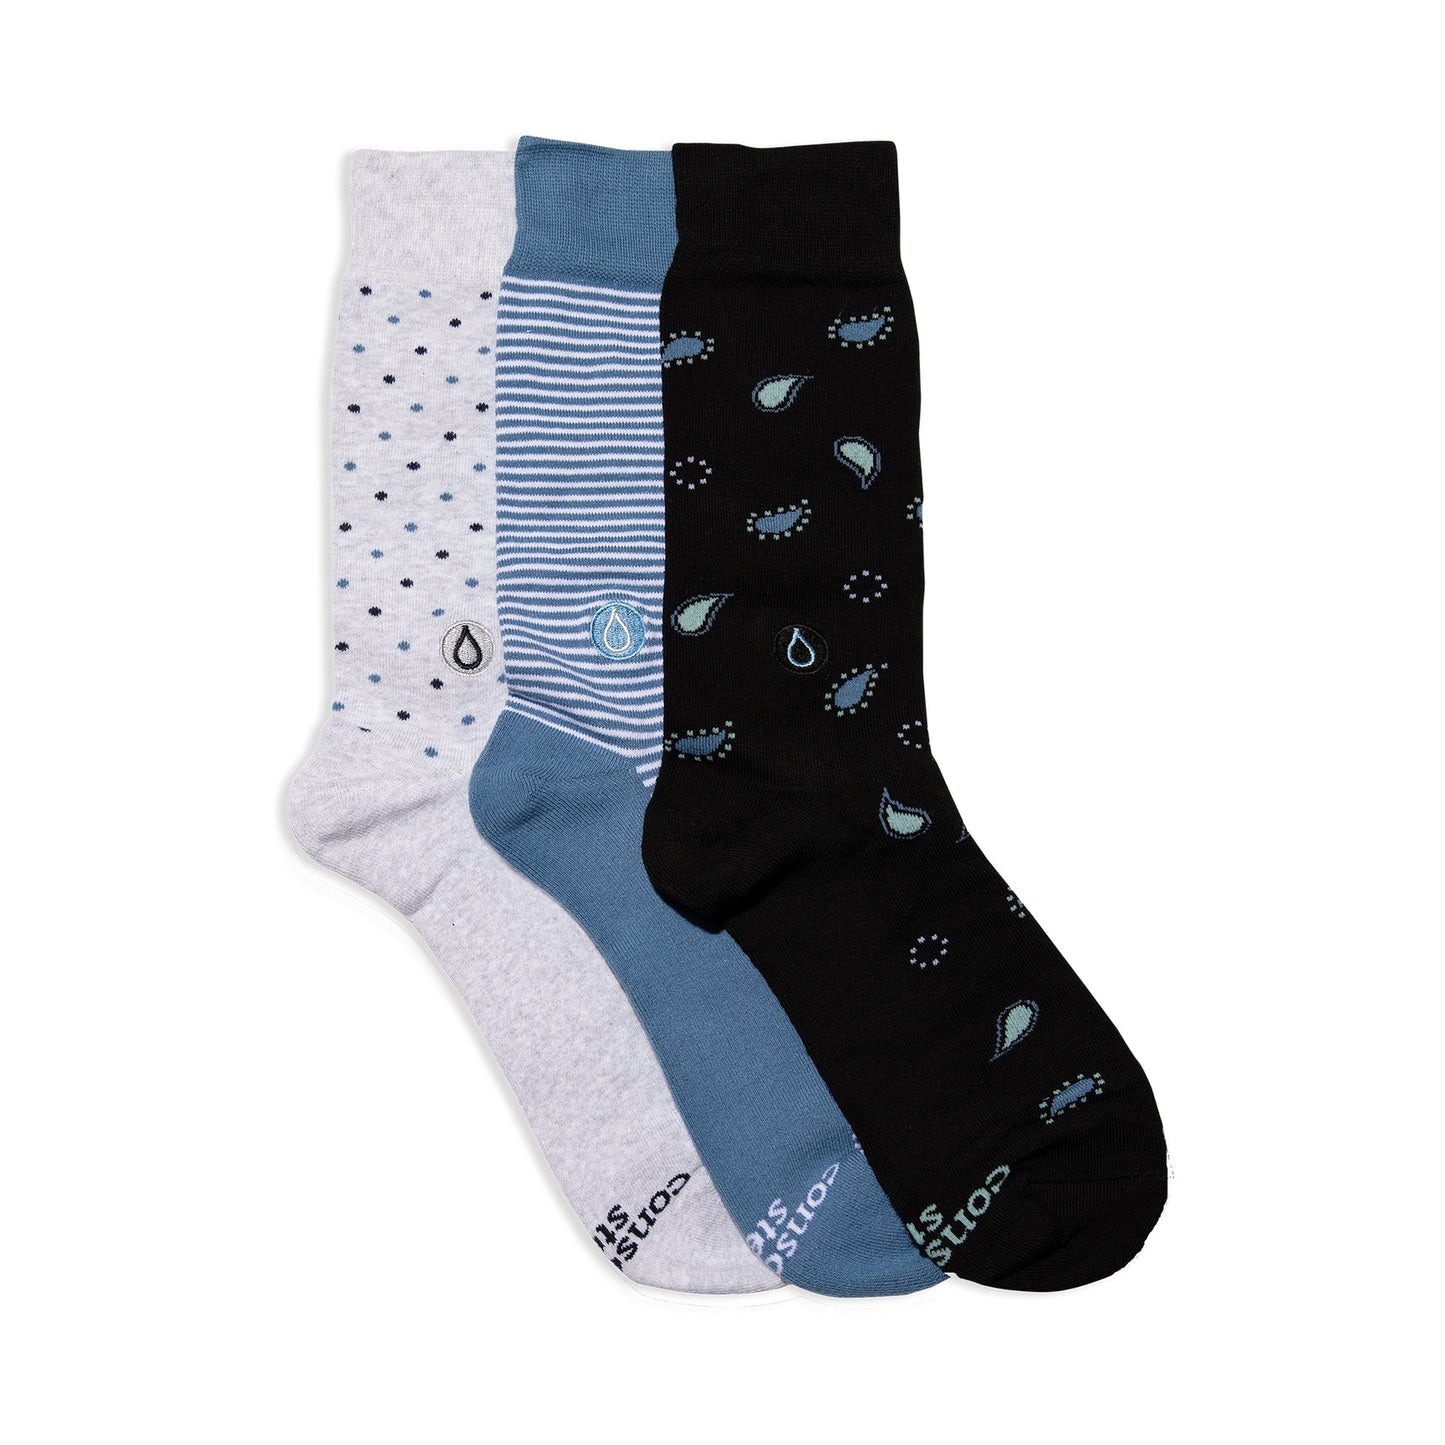 Conscious Step - Gift Box: Socks that Give Water